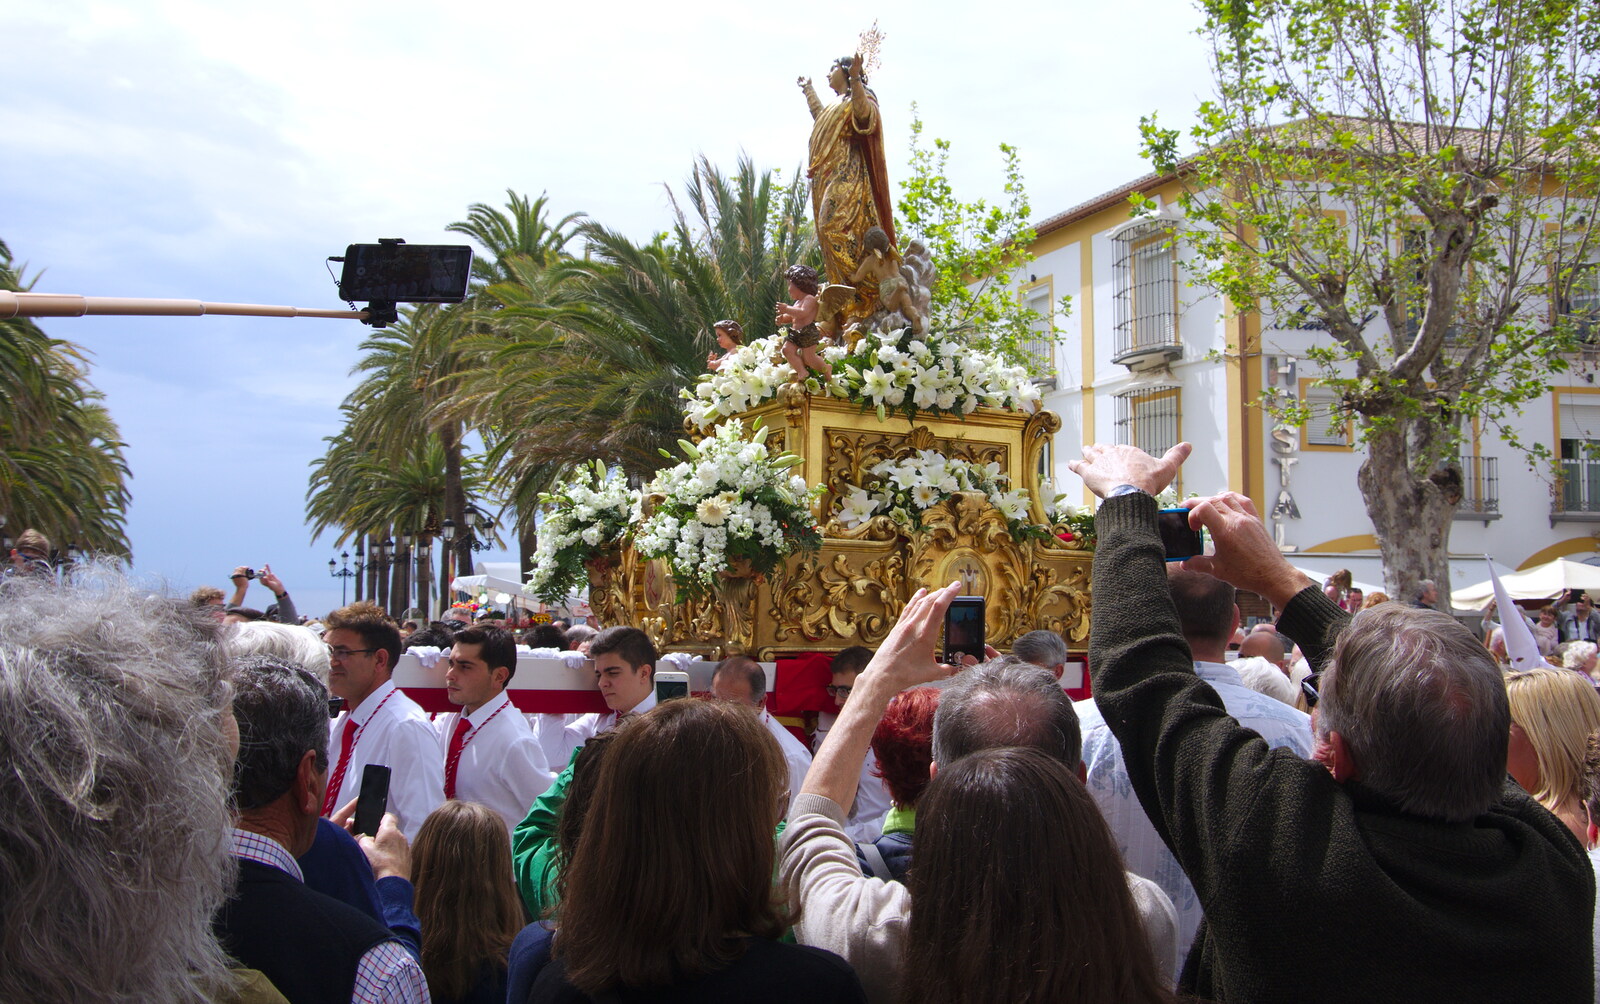 There's even a phone on a selfie stick from An Easter Parade, Nerja, Andalusia, Spain - 21st April 2019